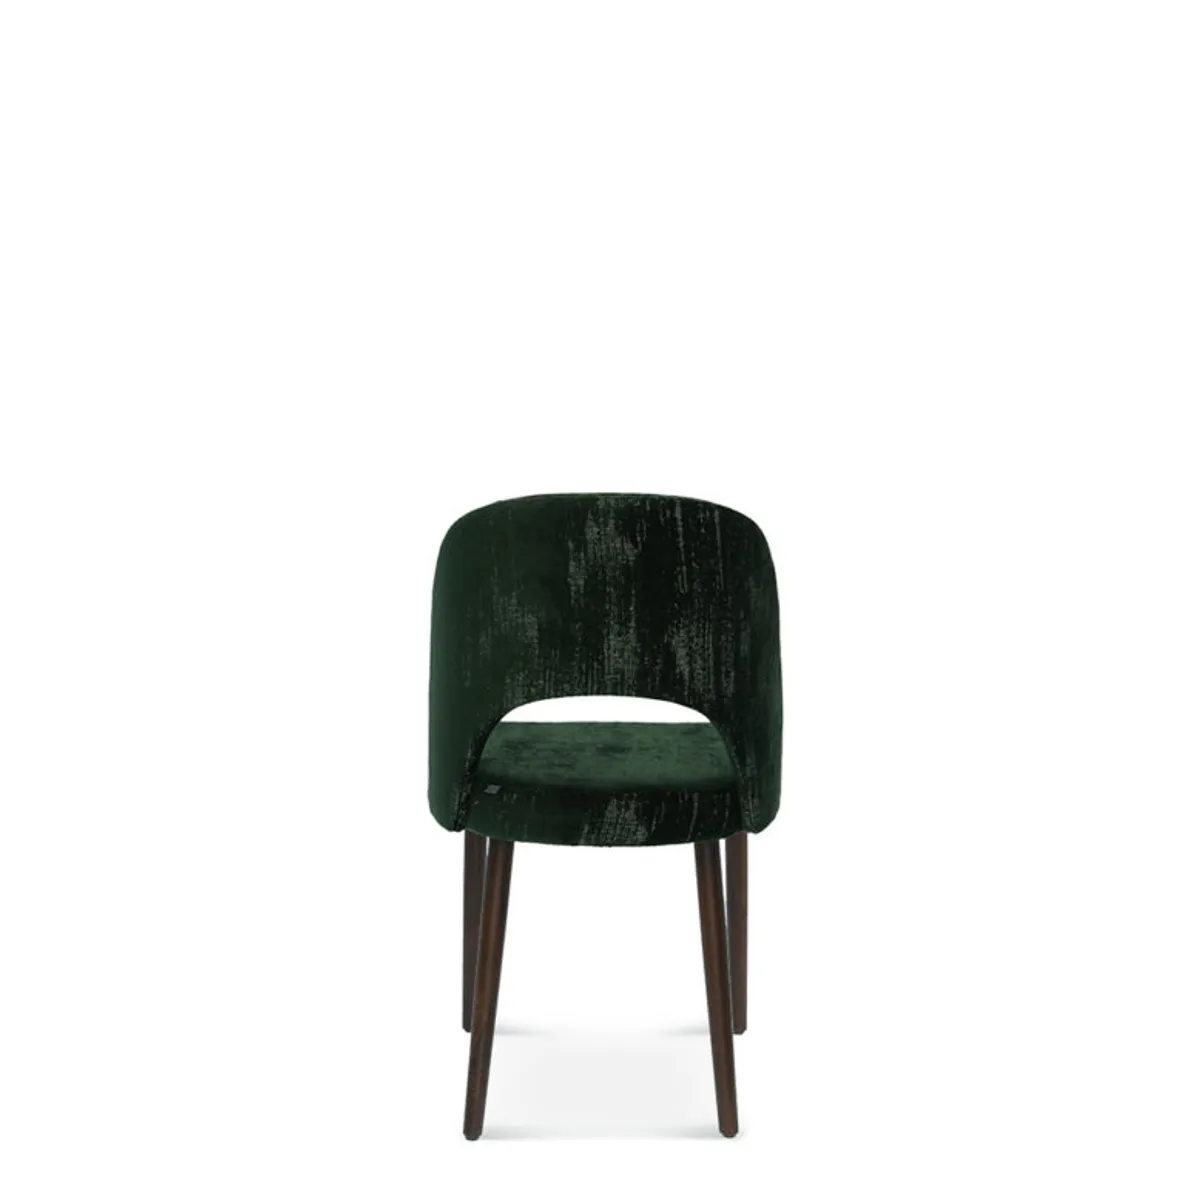 Curve Soft Side Chair A 1412 2 Bar Stool Inside Out Contracts